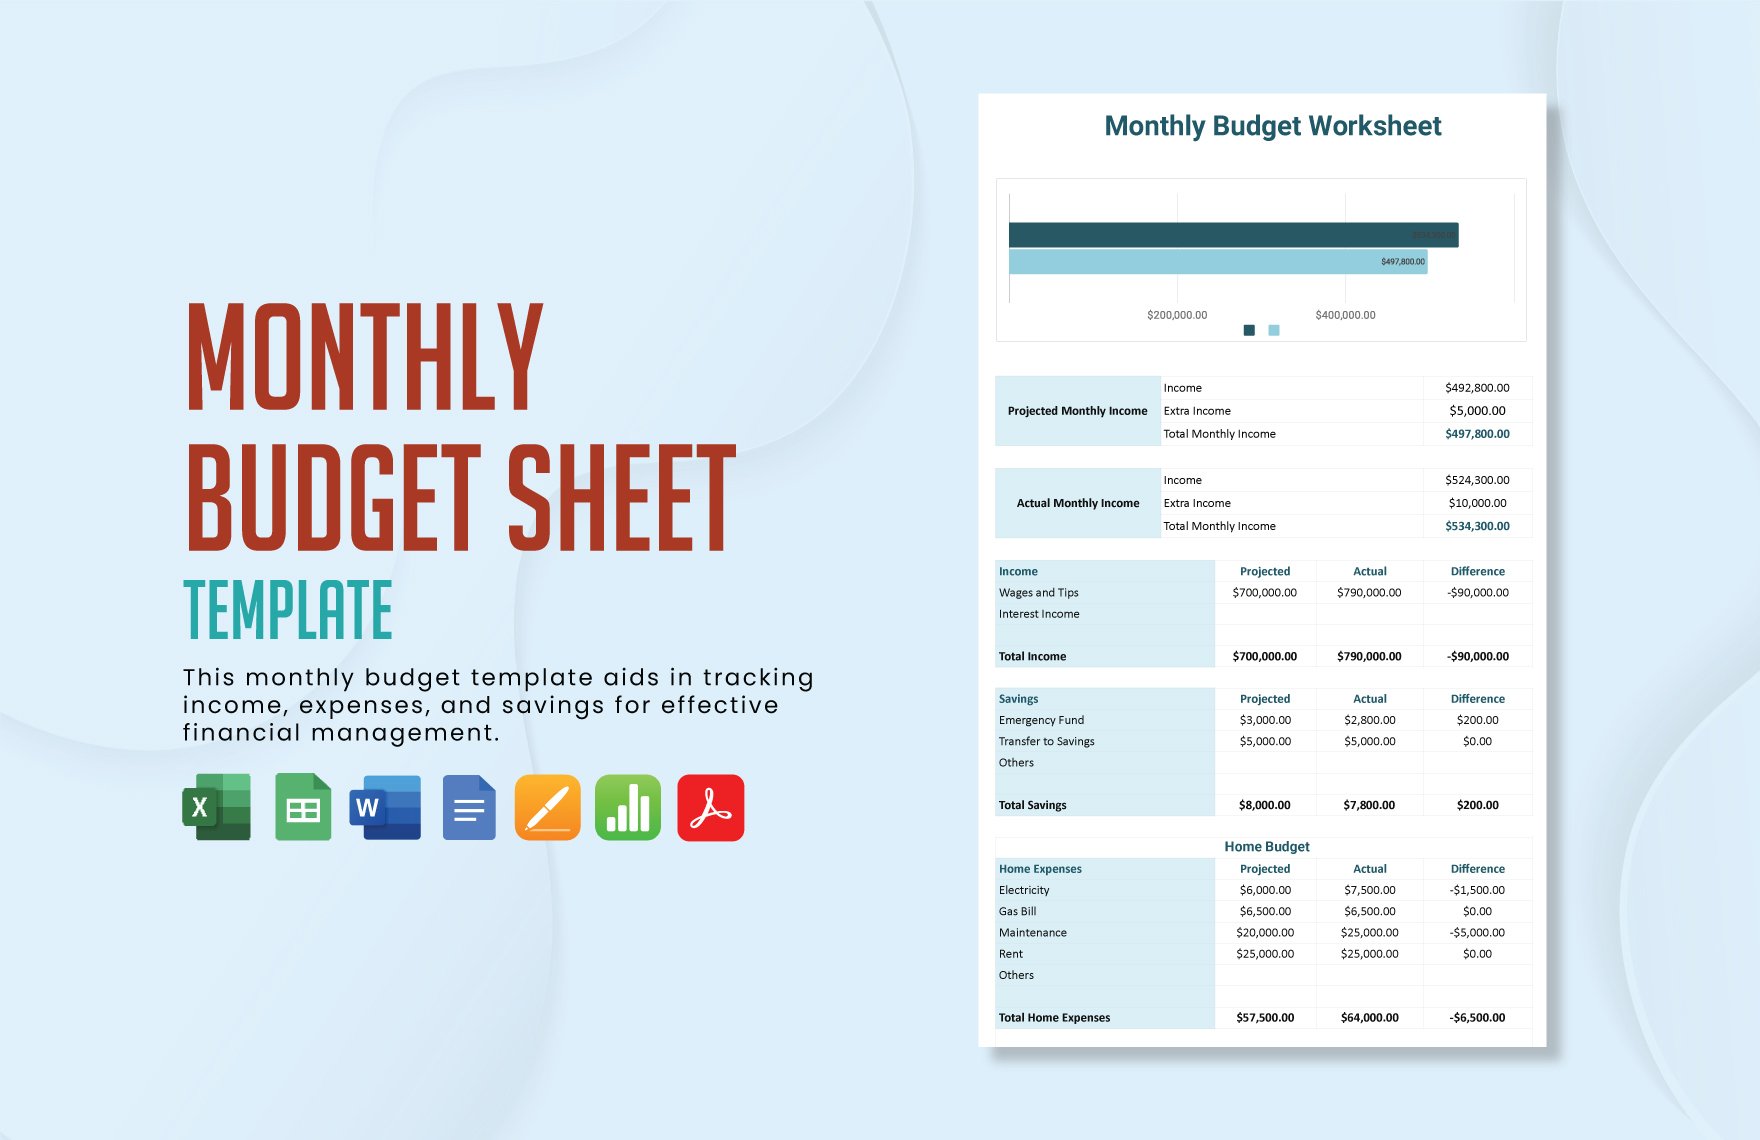 Monthly Budget Sheet Template in Word, Google Docs, Excel, PDF, Google Sheets, Apple Pages, Apple Numbers